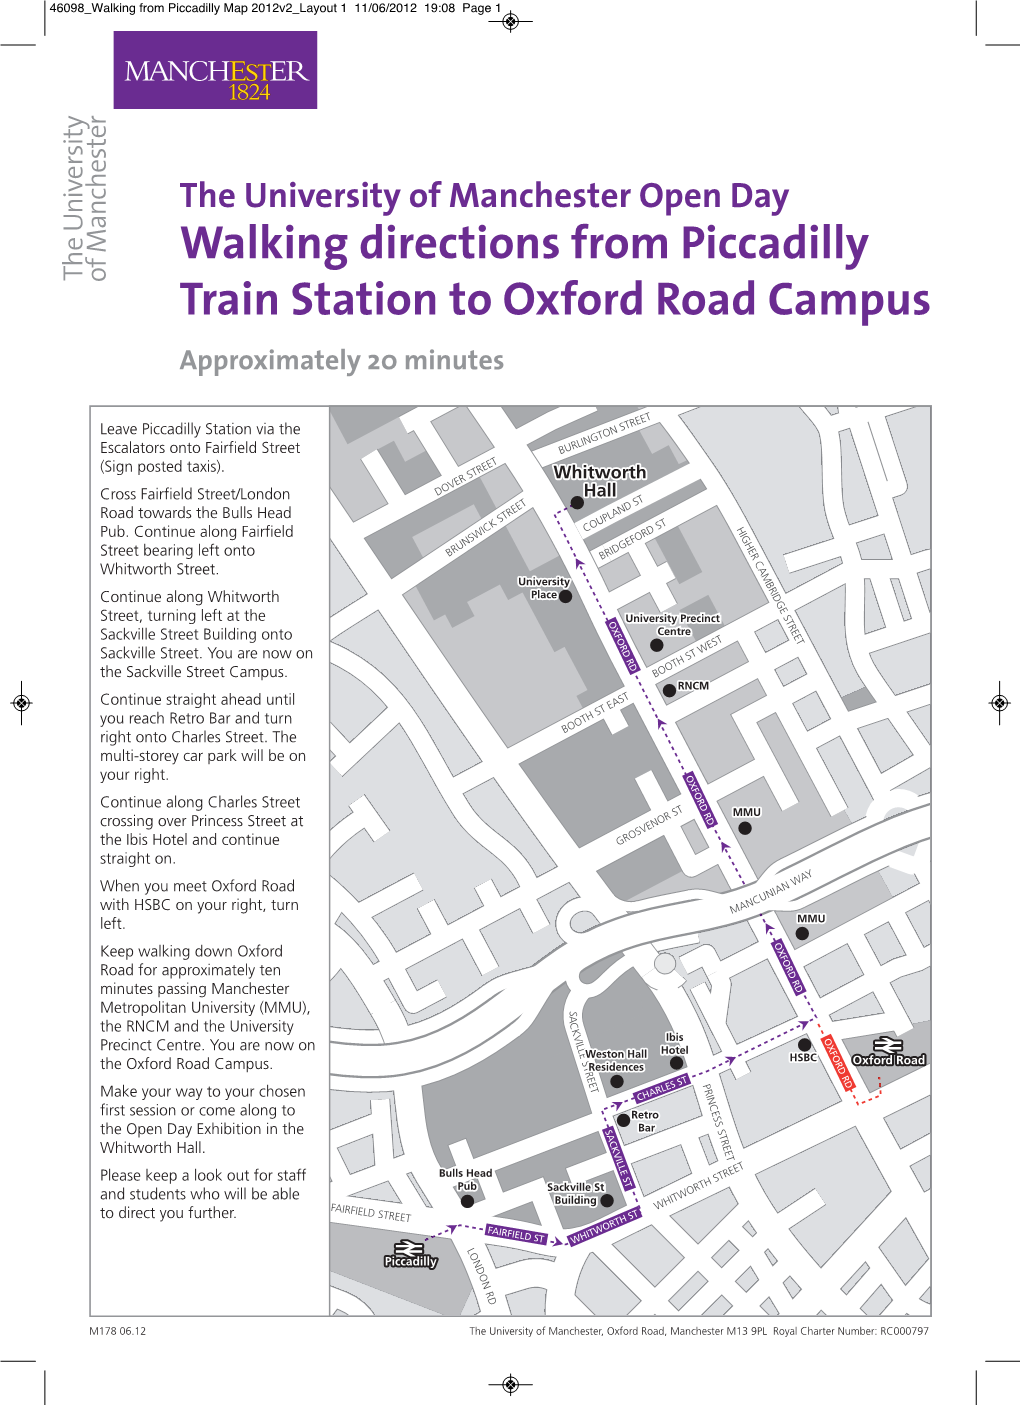 Walking Directions from Piccadilly Train Station to Oxford Road Campus Approximately 20 Minutes